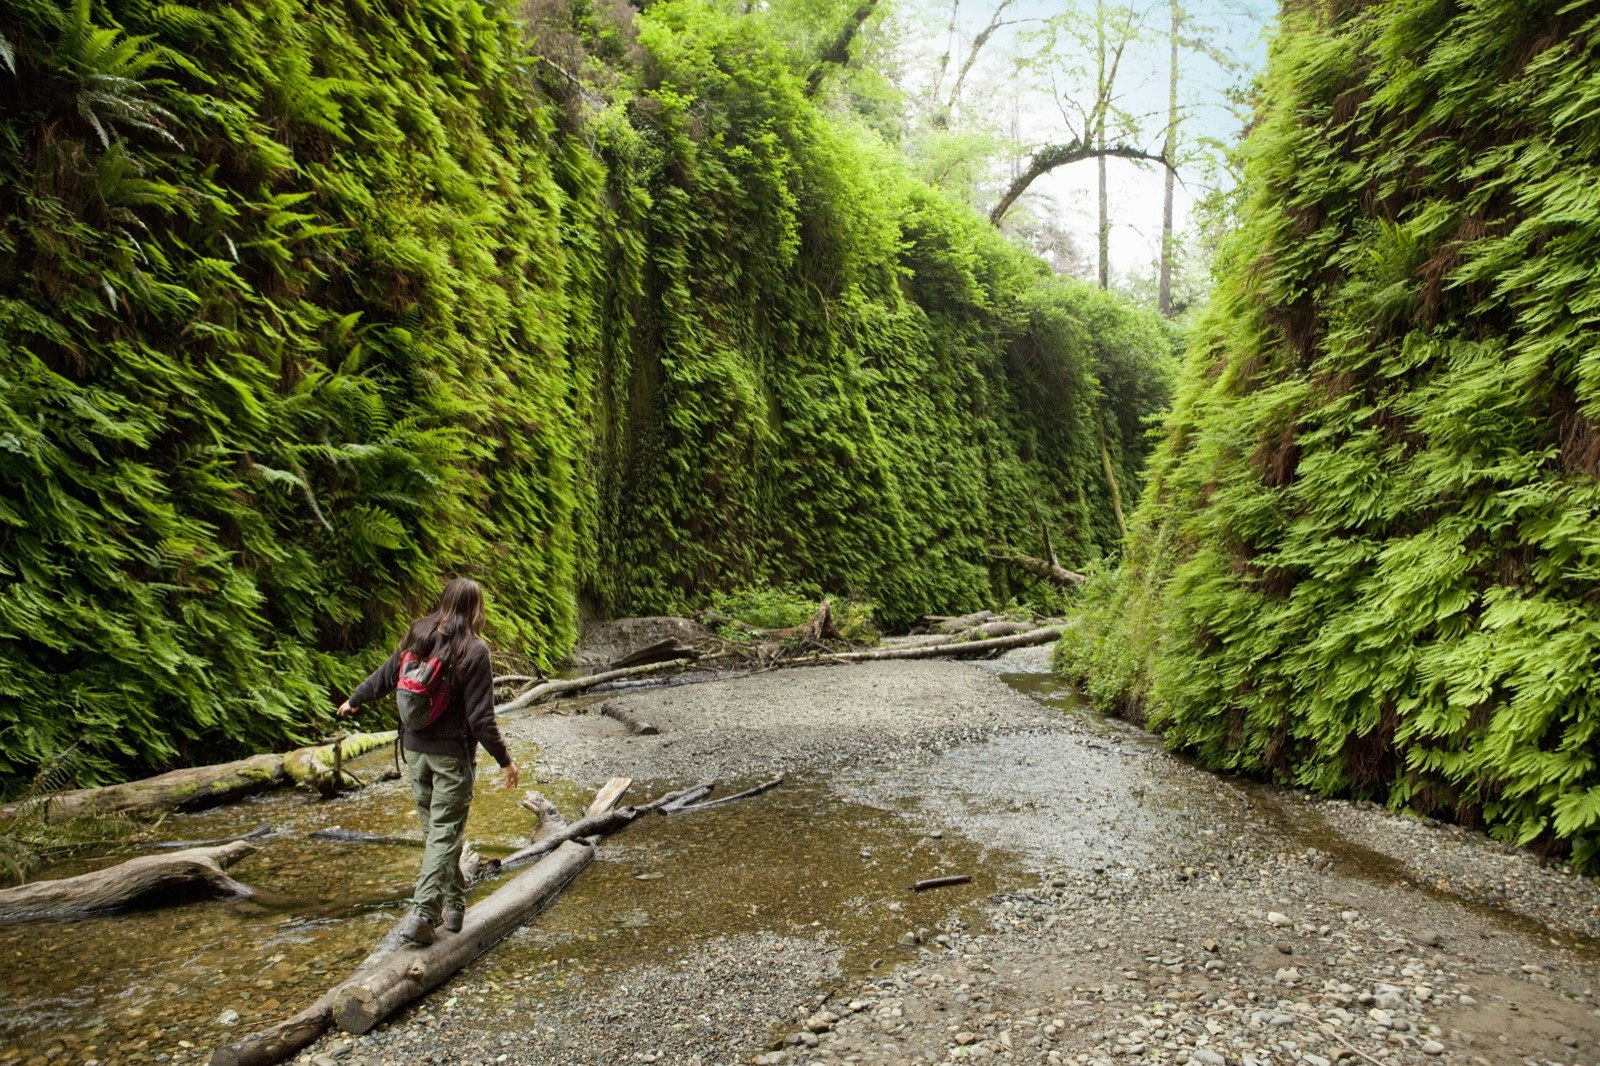 A person walks through a small canyon with walls covered in ferns; best of Humboldt County california